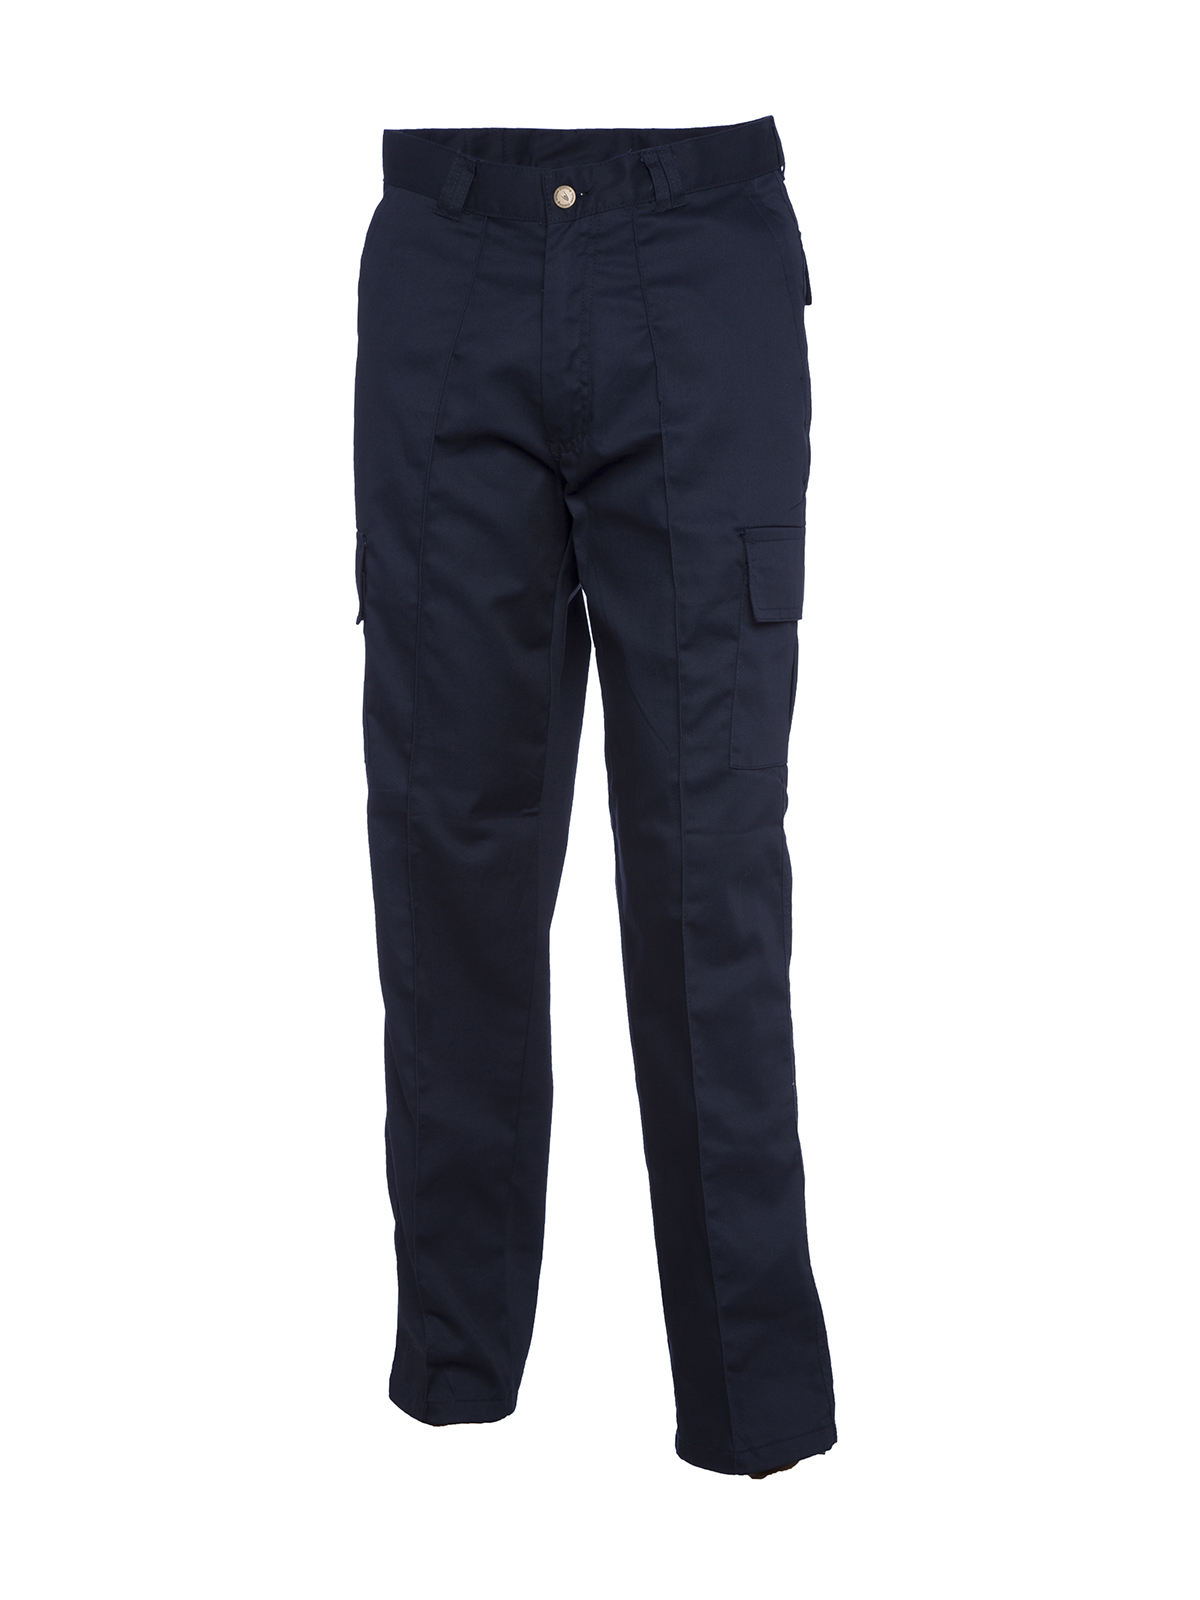 Cargo Trousers, Navy Blue - 34L